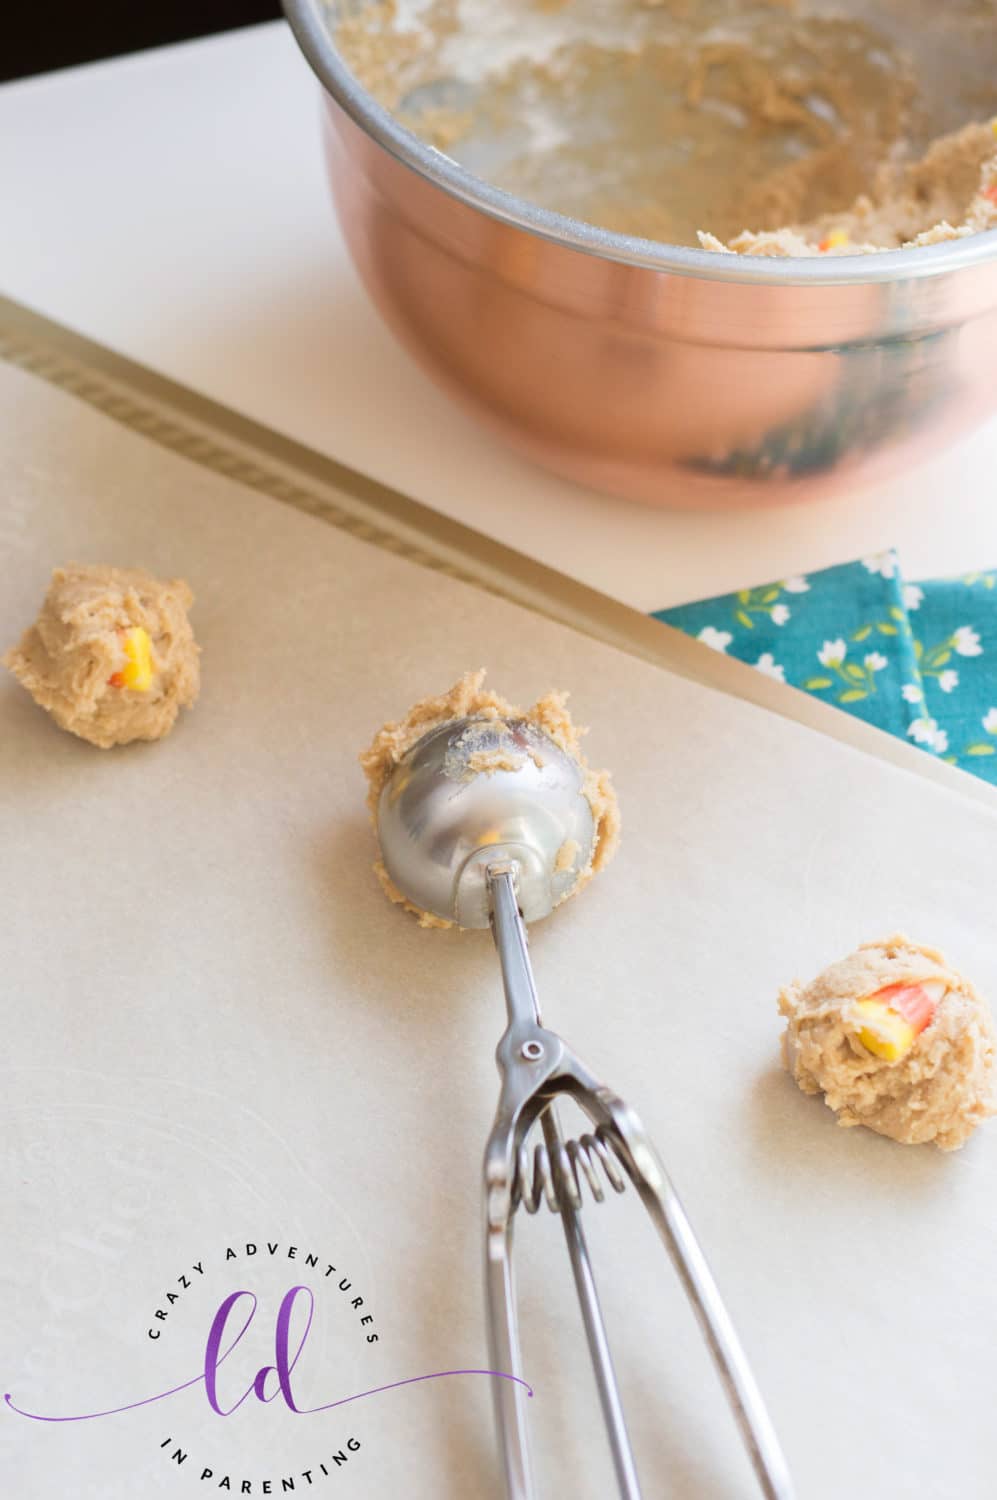 Spoon Batter onto Baking Sheet to Make Candy Corn Peanut Butter Cookies